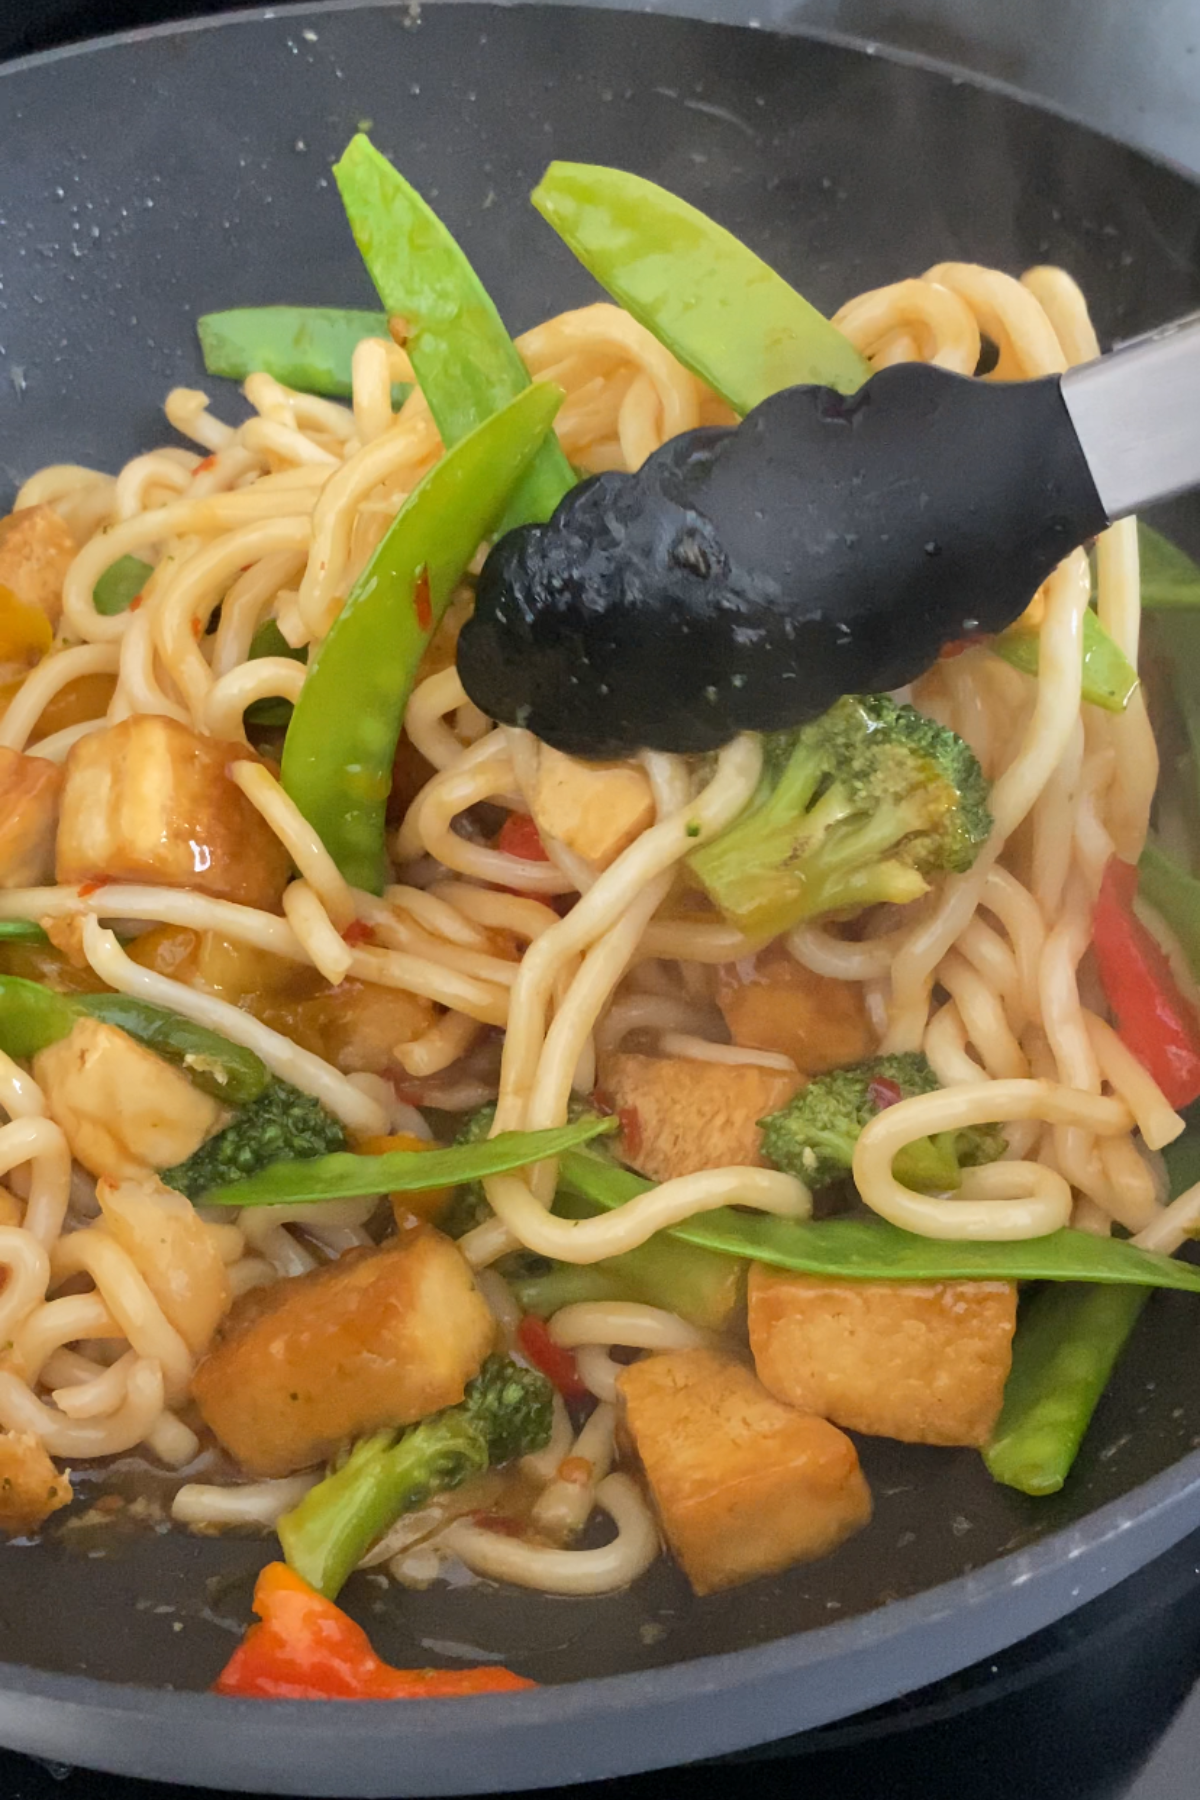 Mixing tofu udon stir fry in a wok.